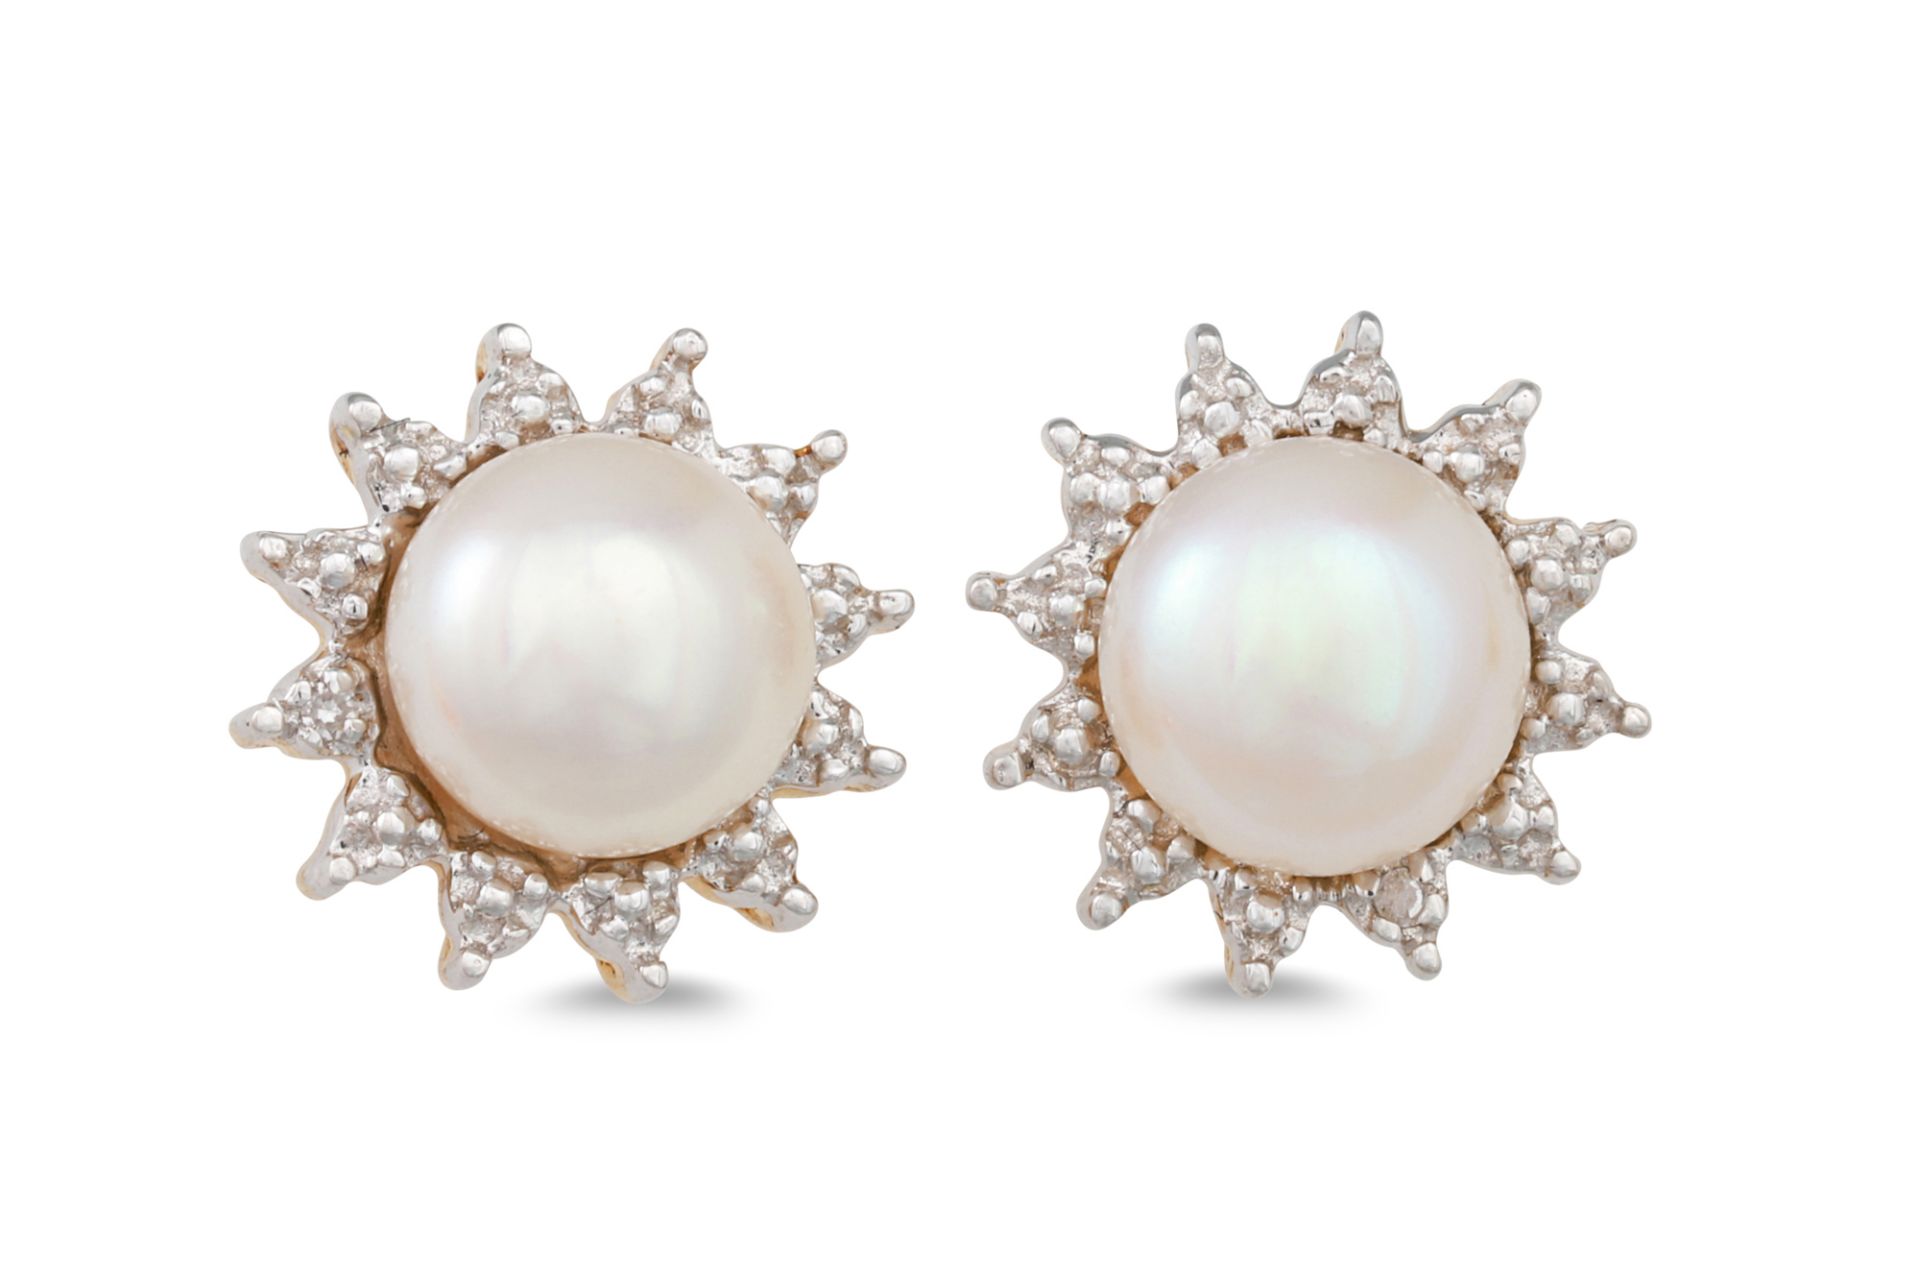 A PAIR OF DIAMOND AND PEARL EARRINGS, cream tones, mounted in white gold